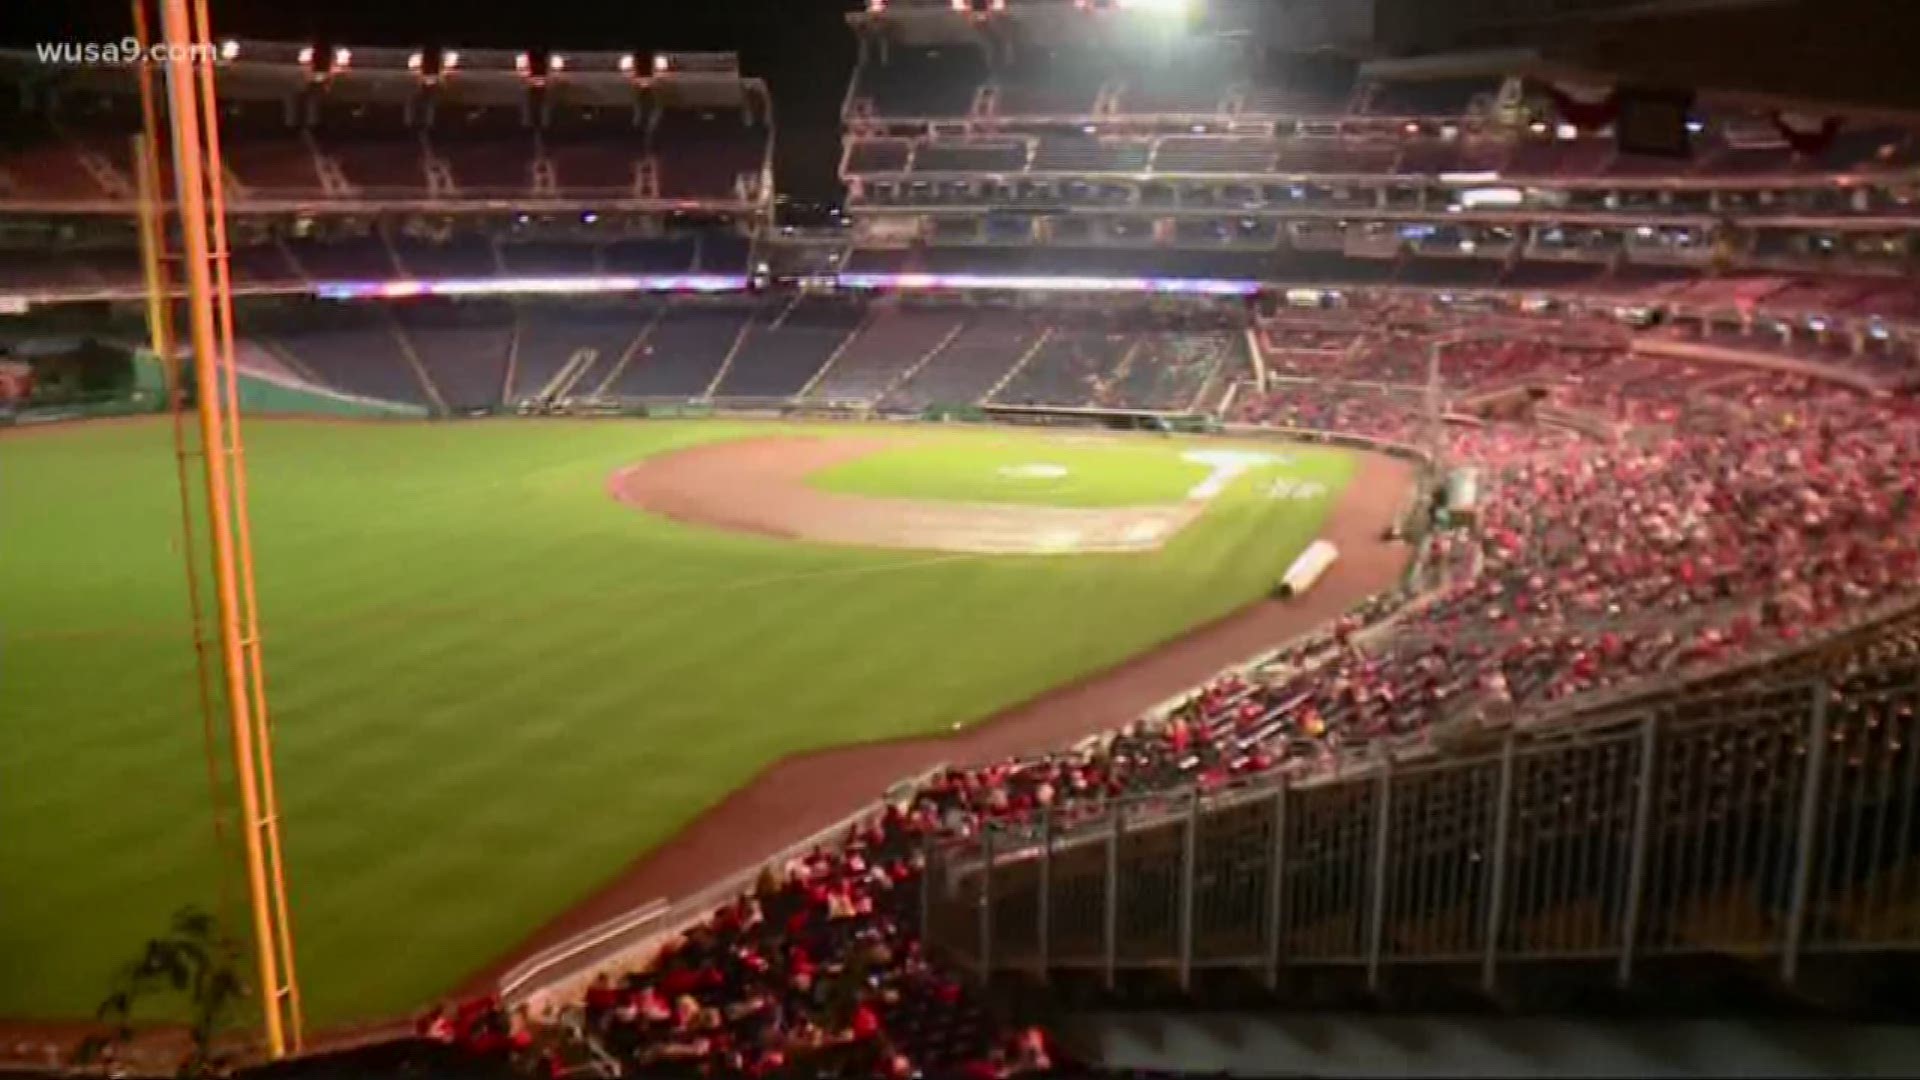 Nationals Park offers numerous sweeping views for fans who attend games with standing room only tickets.